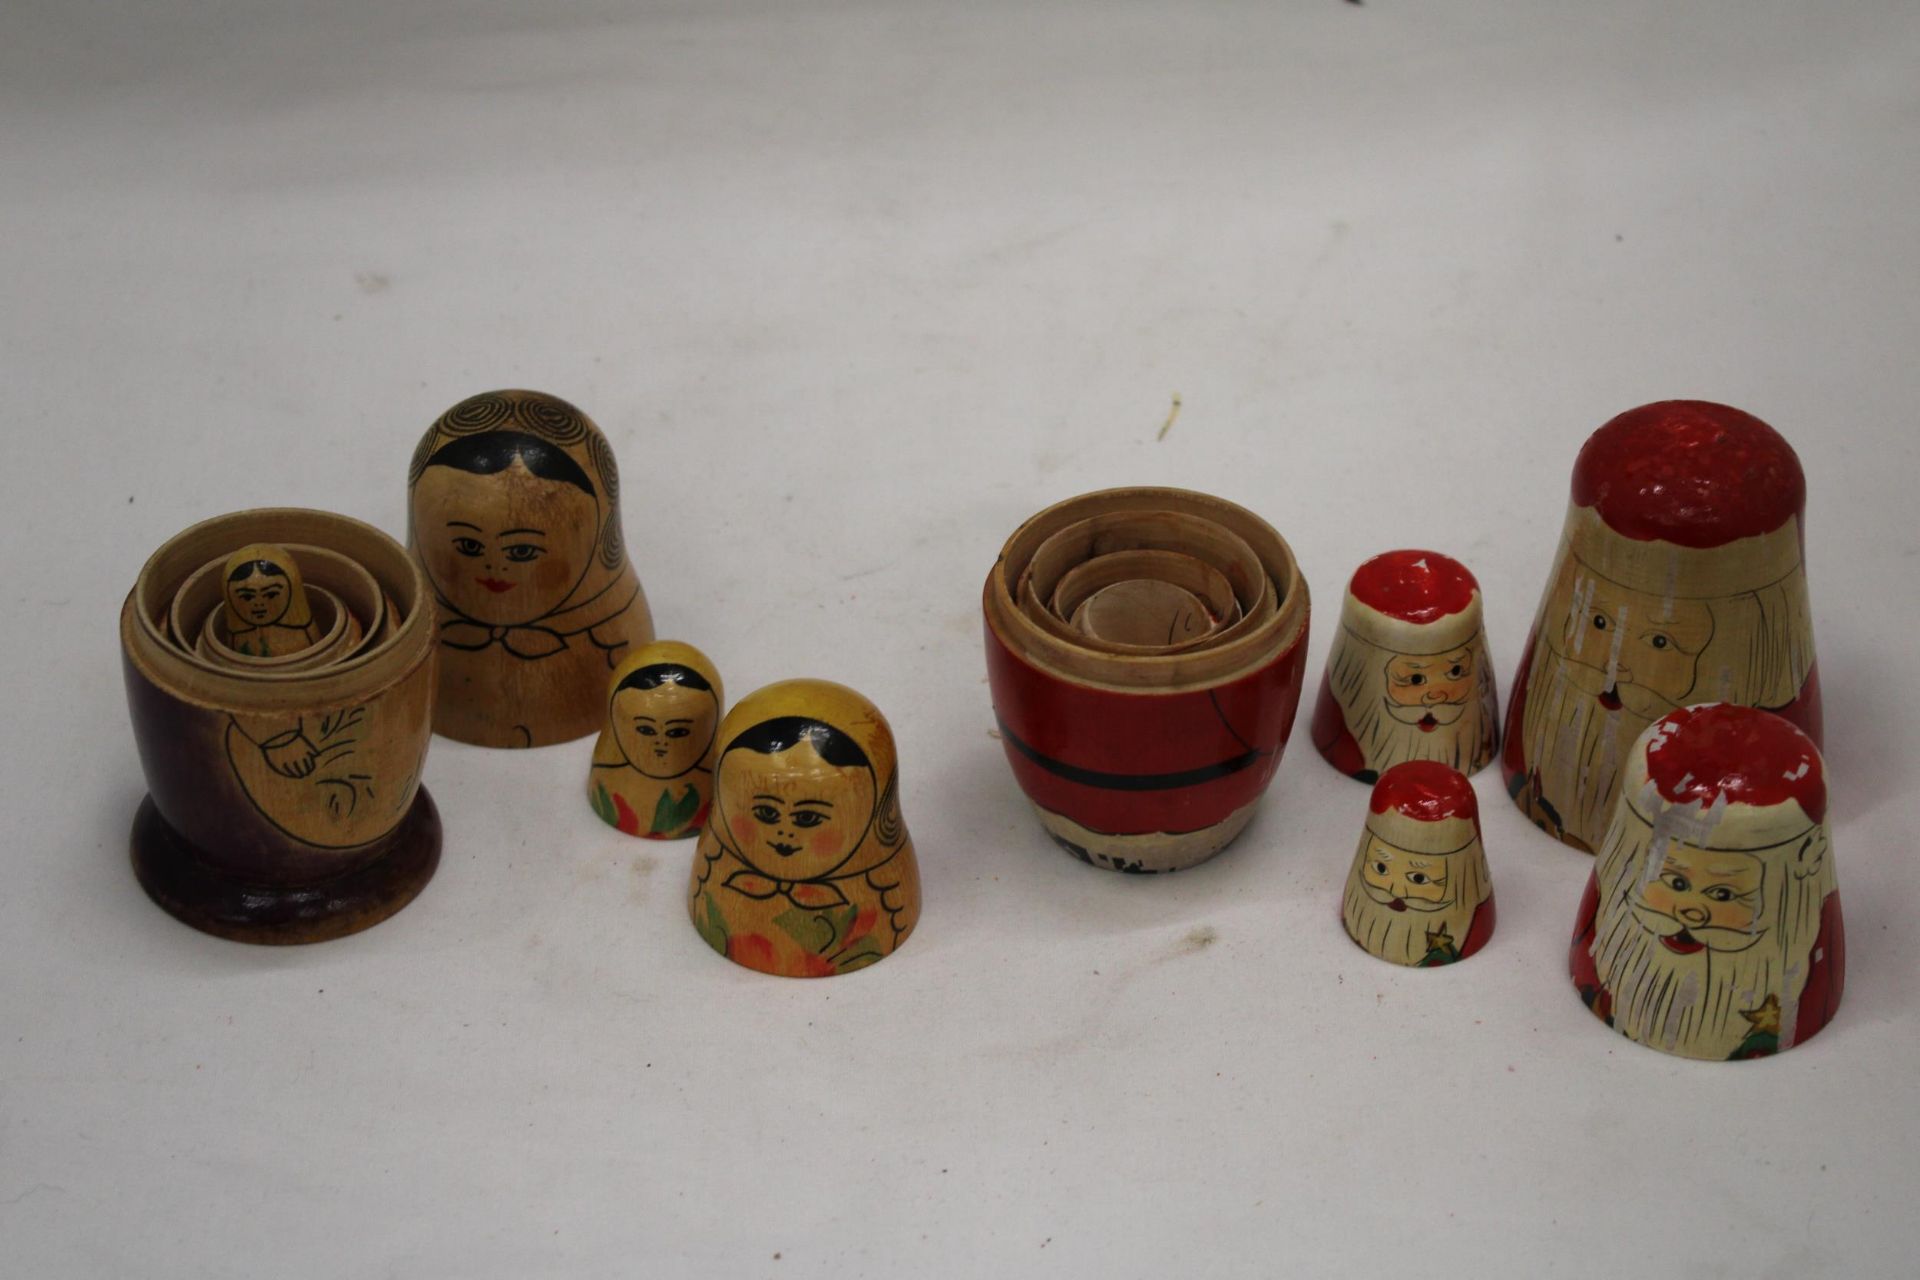 A RUSSIAN NESTING DOLL AND FATHER CHRISTMAS - Image 5 of 5